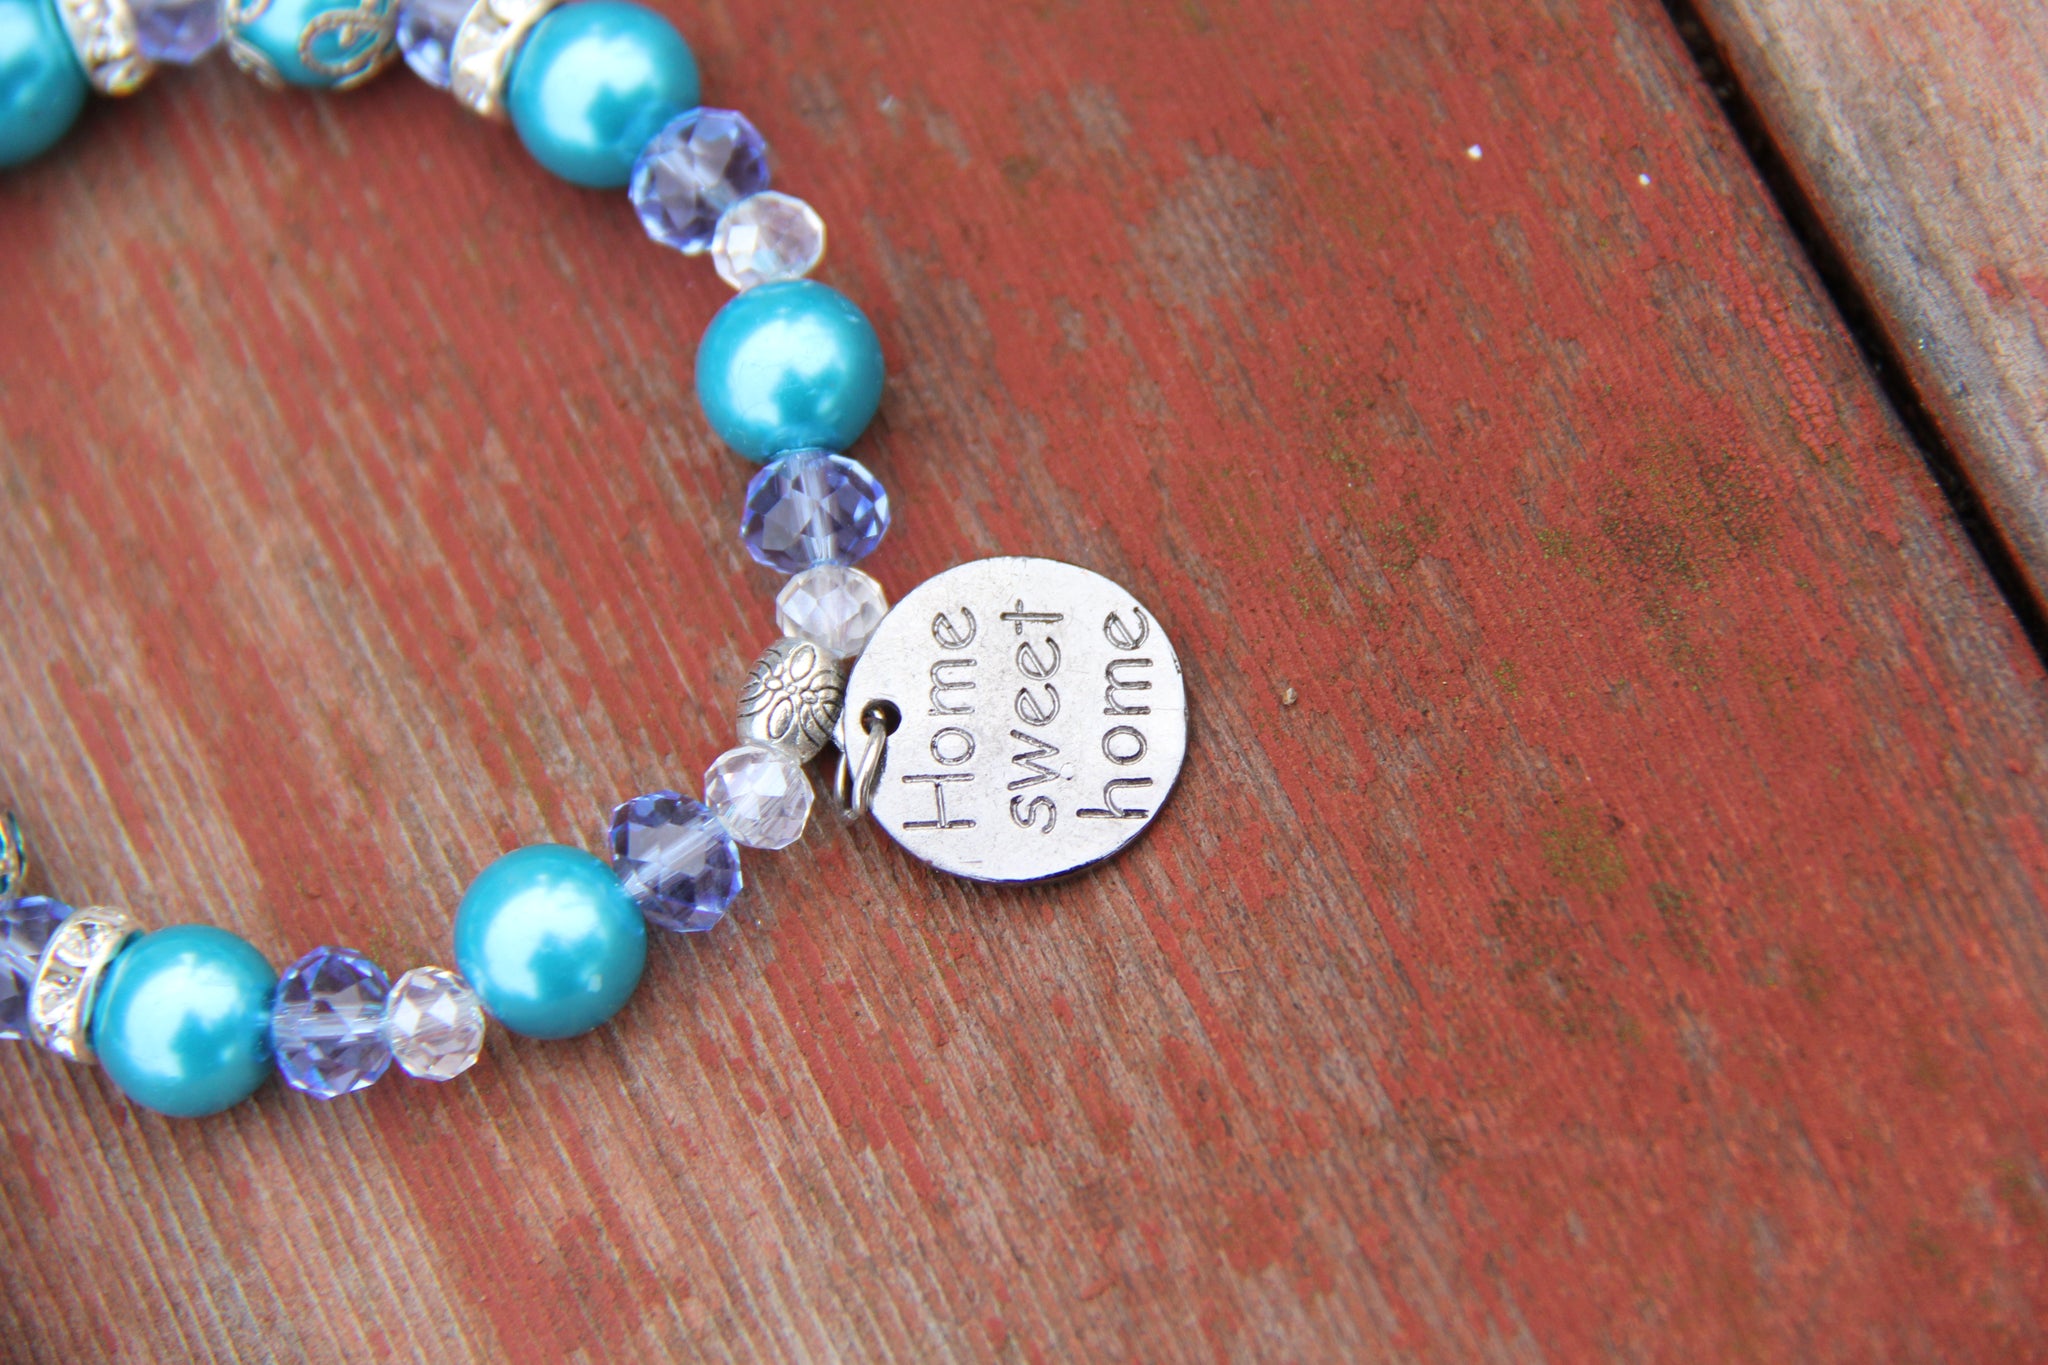 Turquoise and blue beads bottle bracelet with "Home sweet home" charm